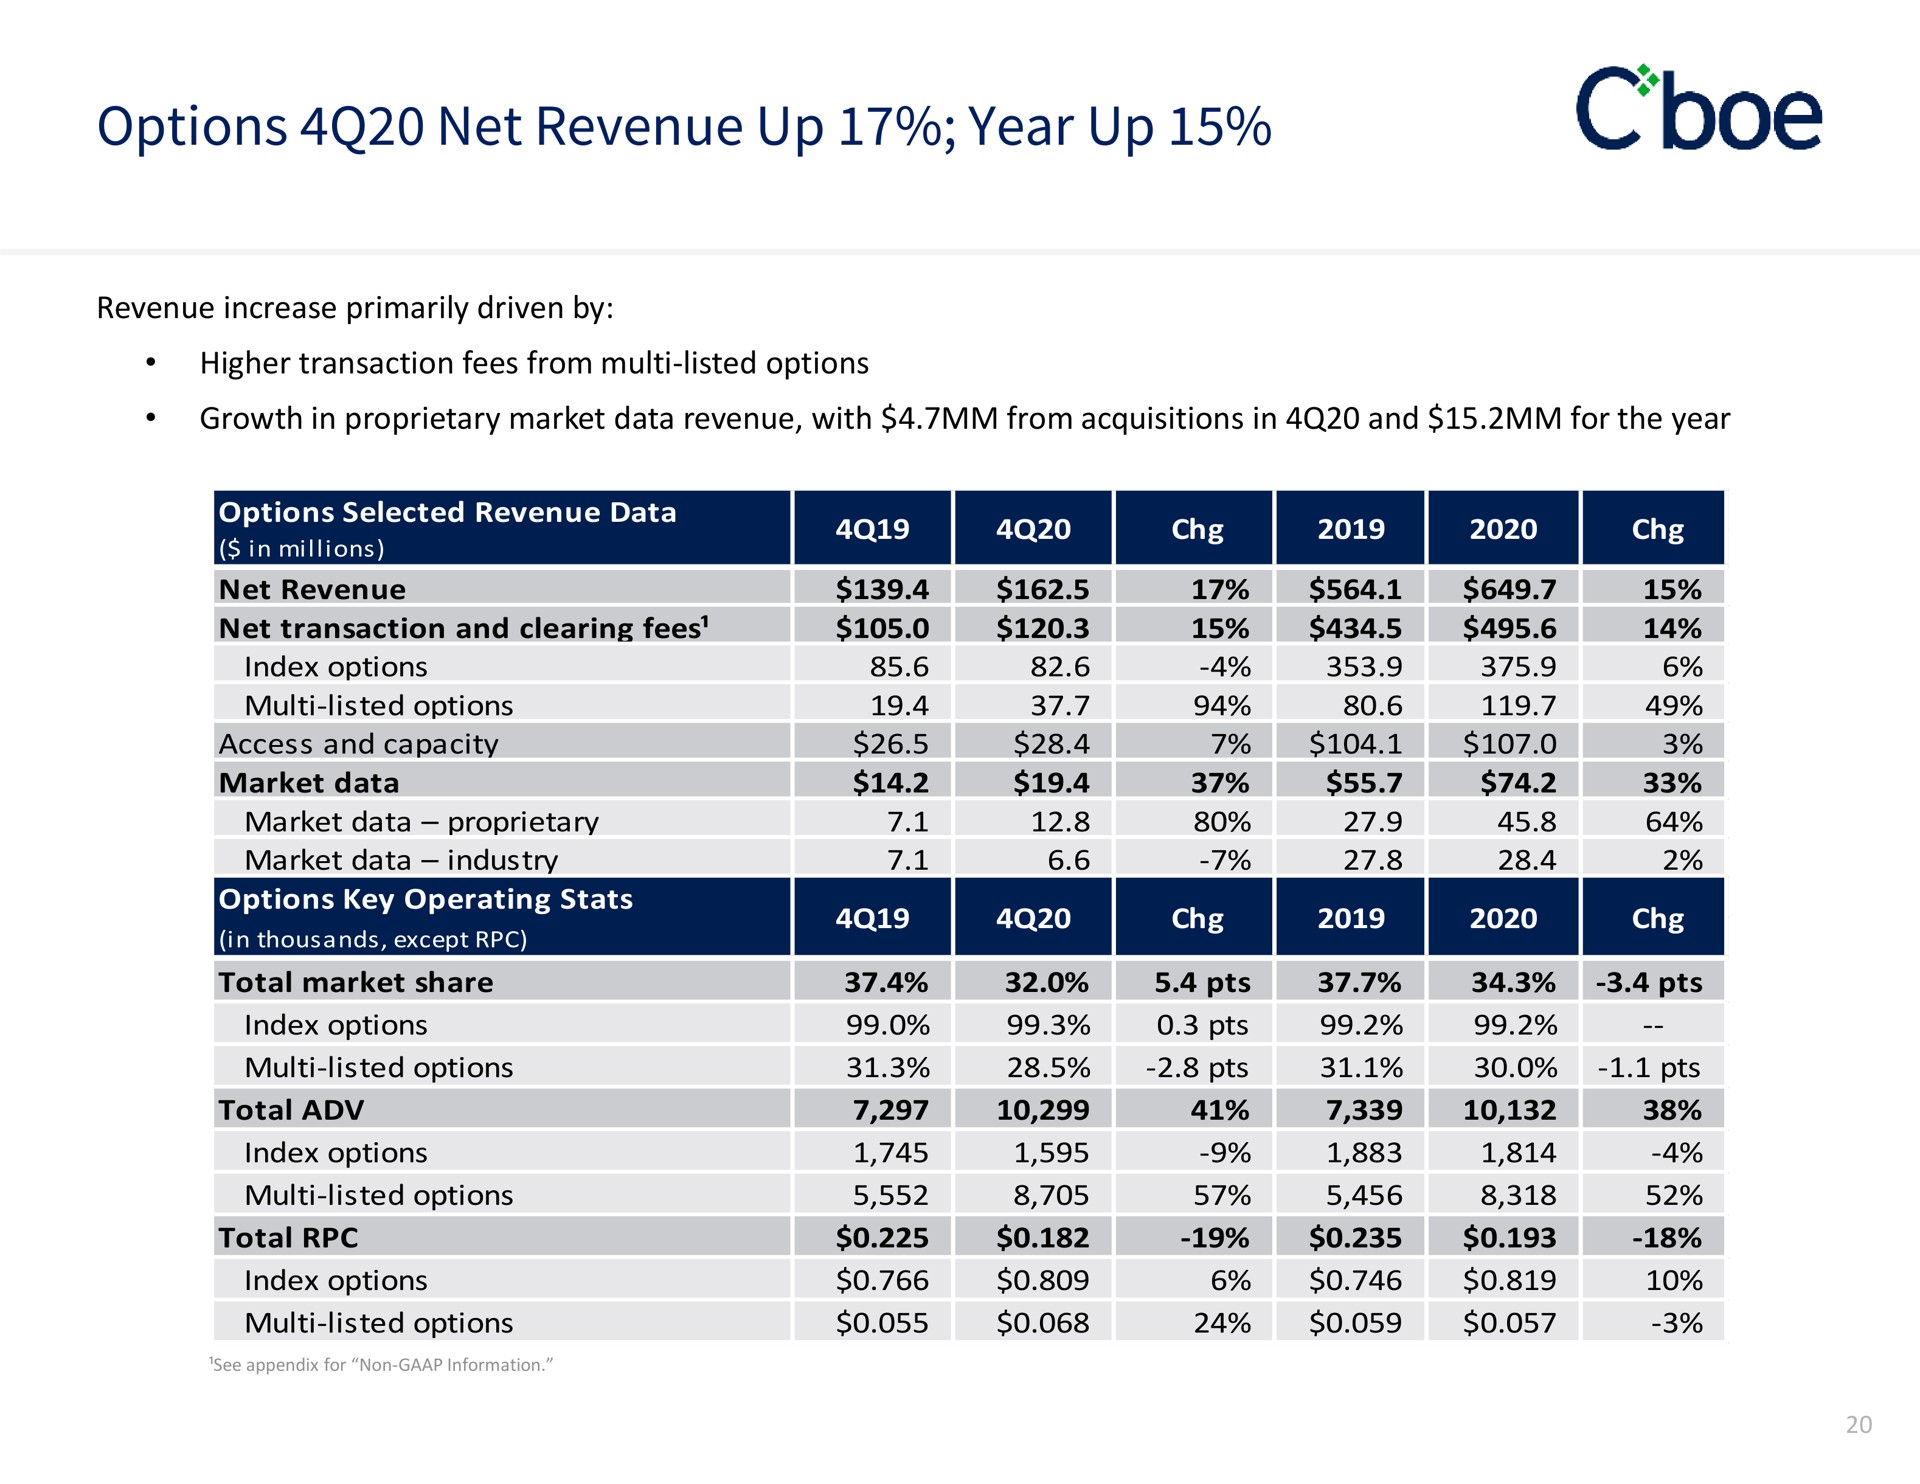 options net revenue up year up | Cboe